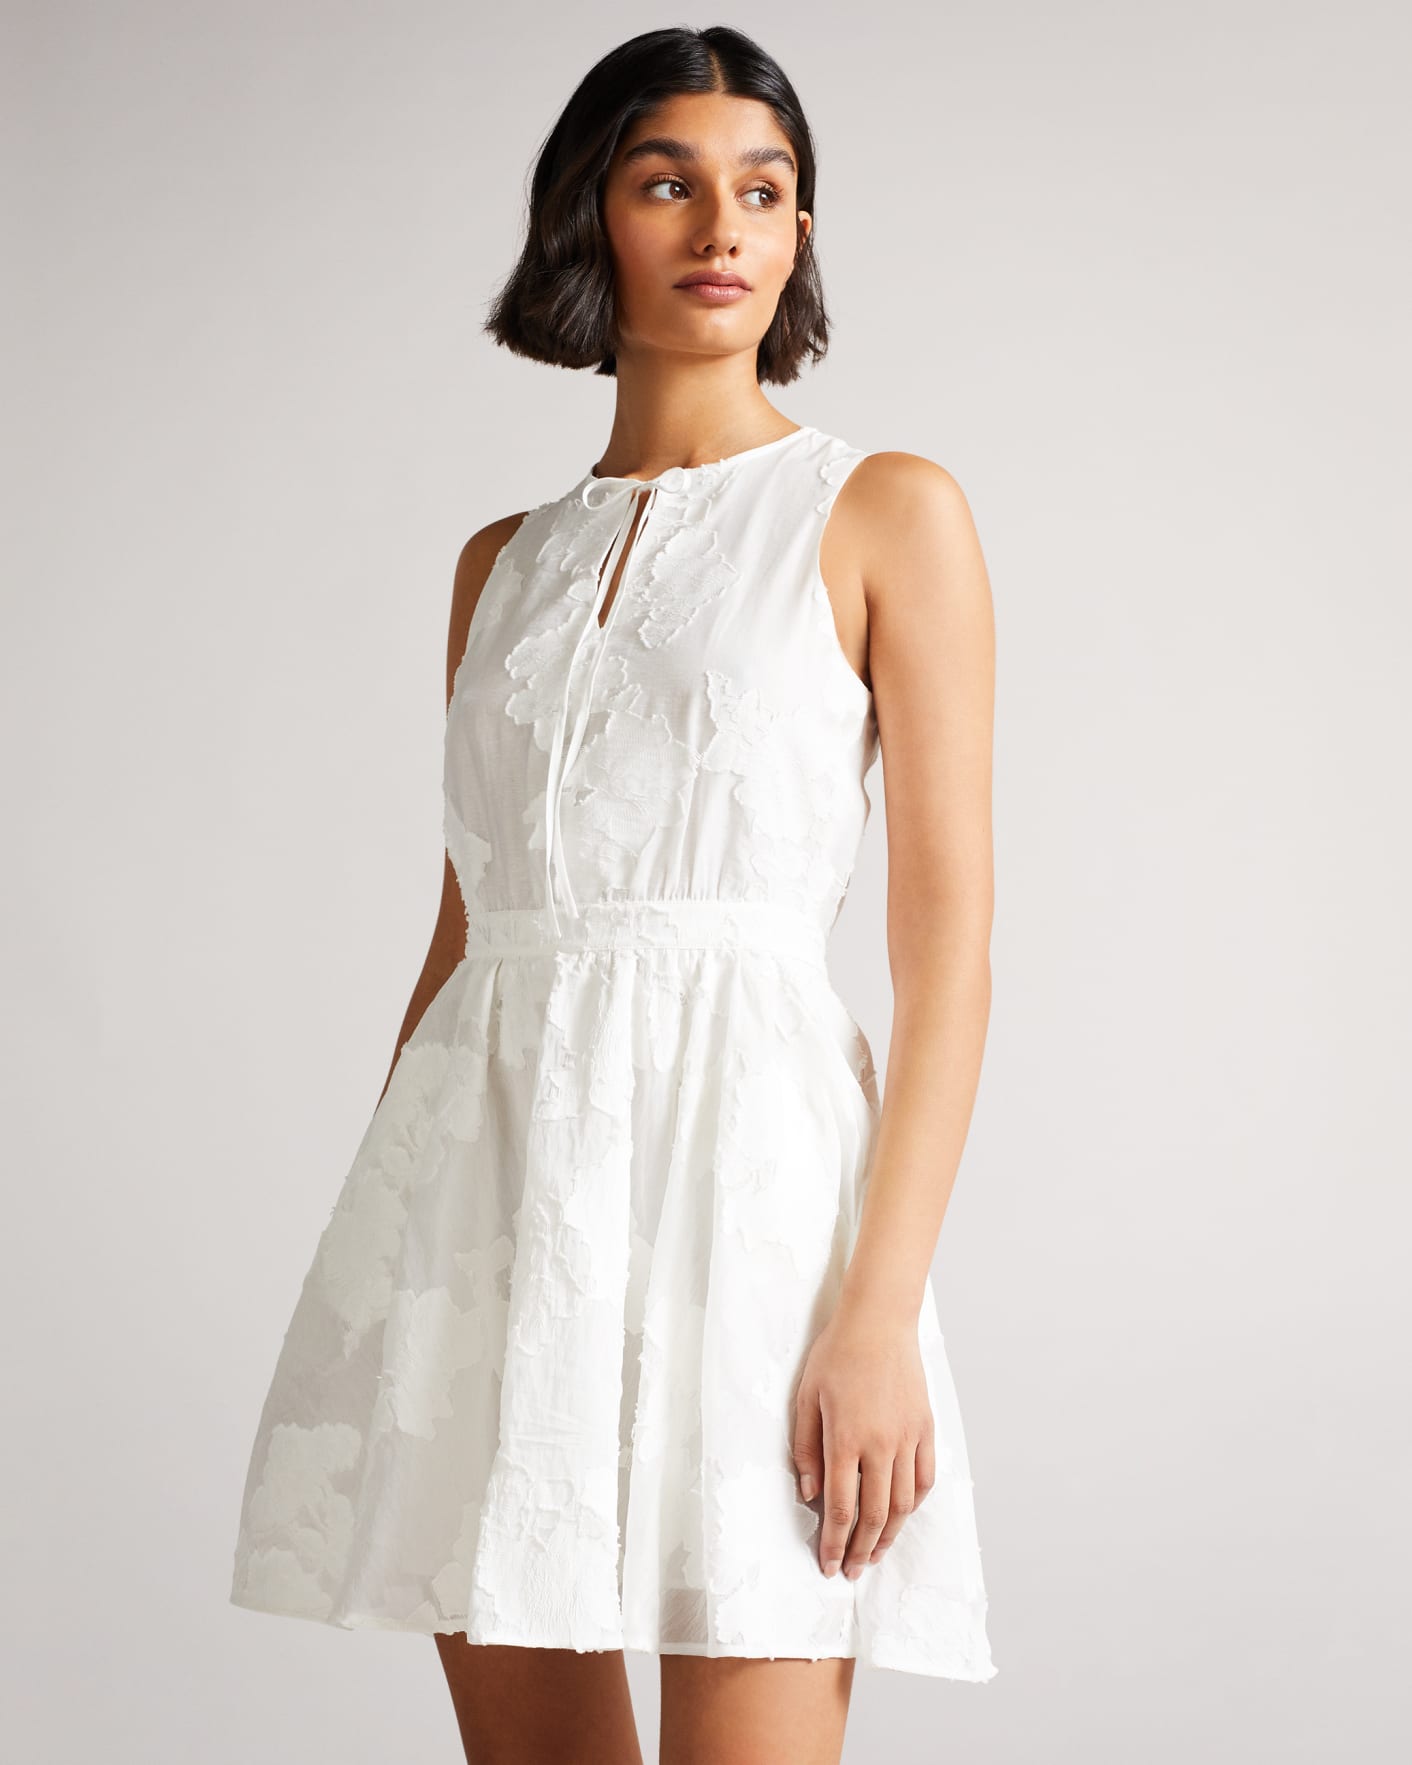 White Flippy Mini Dress With Neck Tie Ted Baker